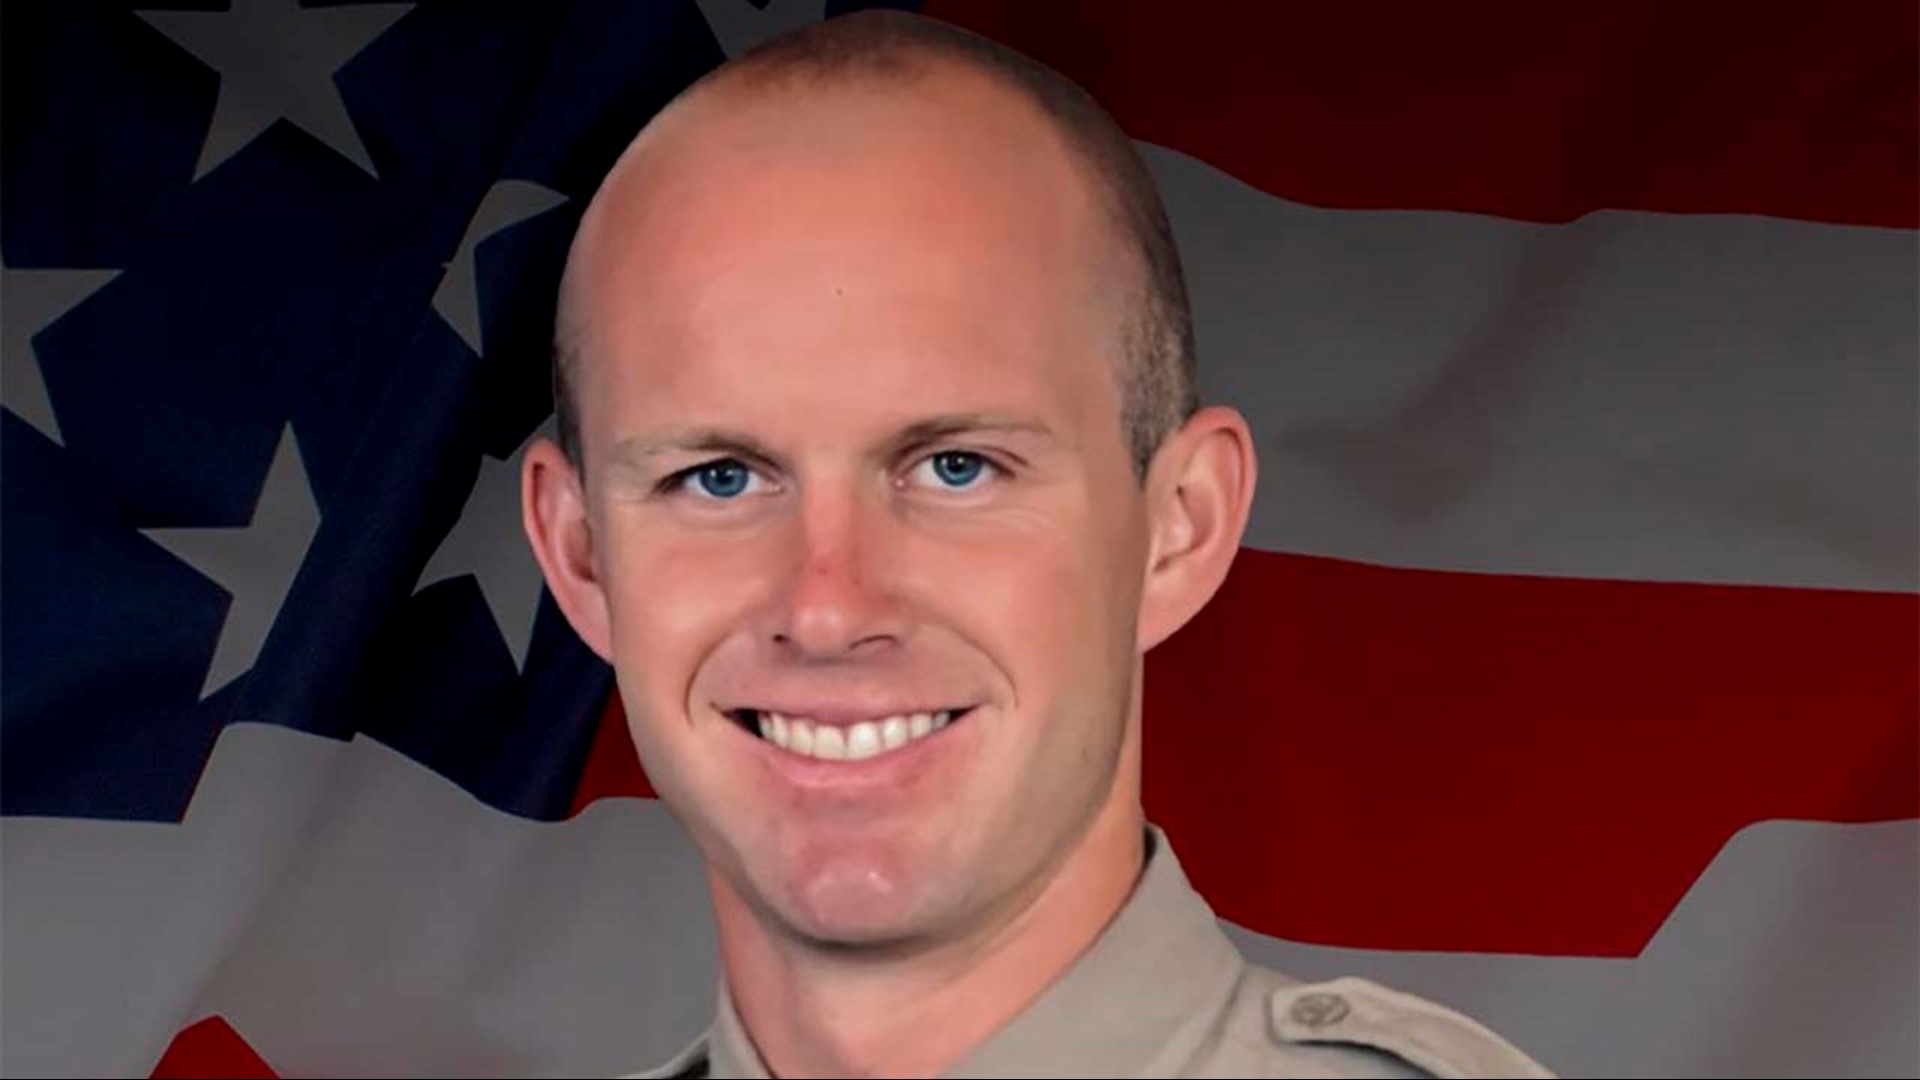 Deputy Ryan Clinkunbroomer, an eight-year veteran of the Sheriff’s Department, tragically lost his life while on duty at Palmdale Sheriff Station.